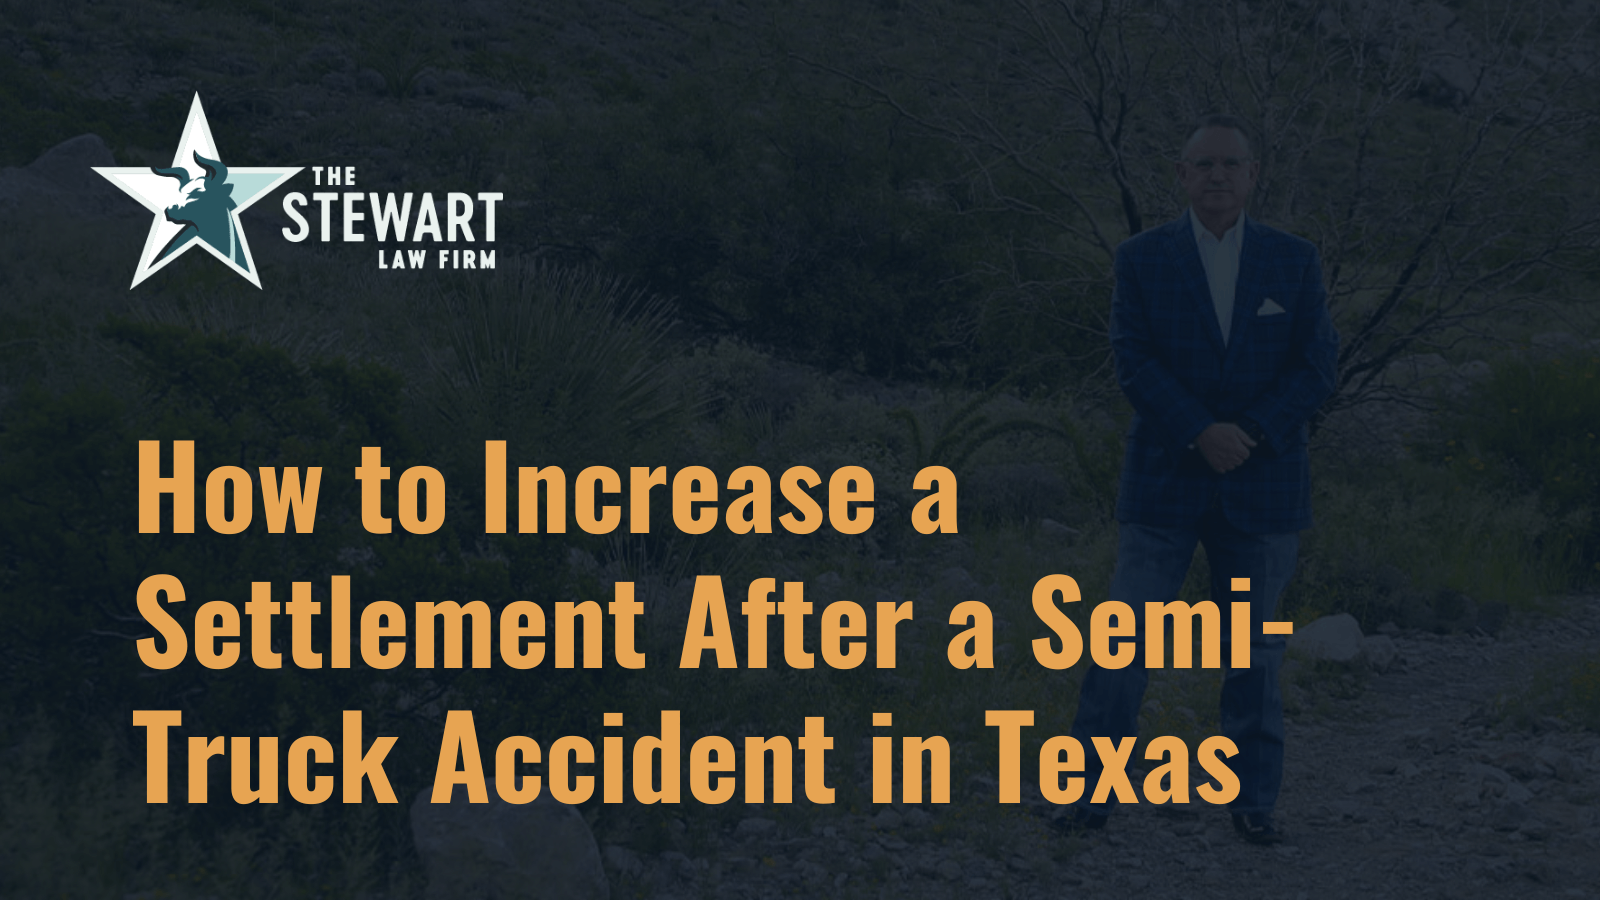 How to Increase a Settlement After a Semi-Truck Accident in Texas